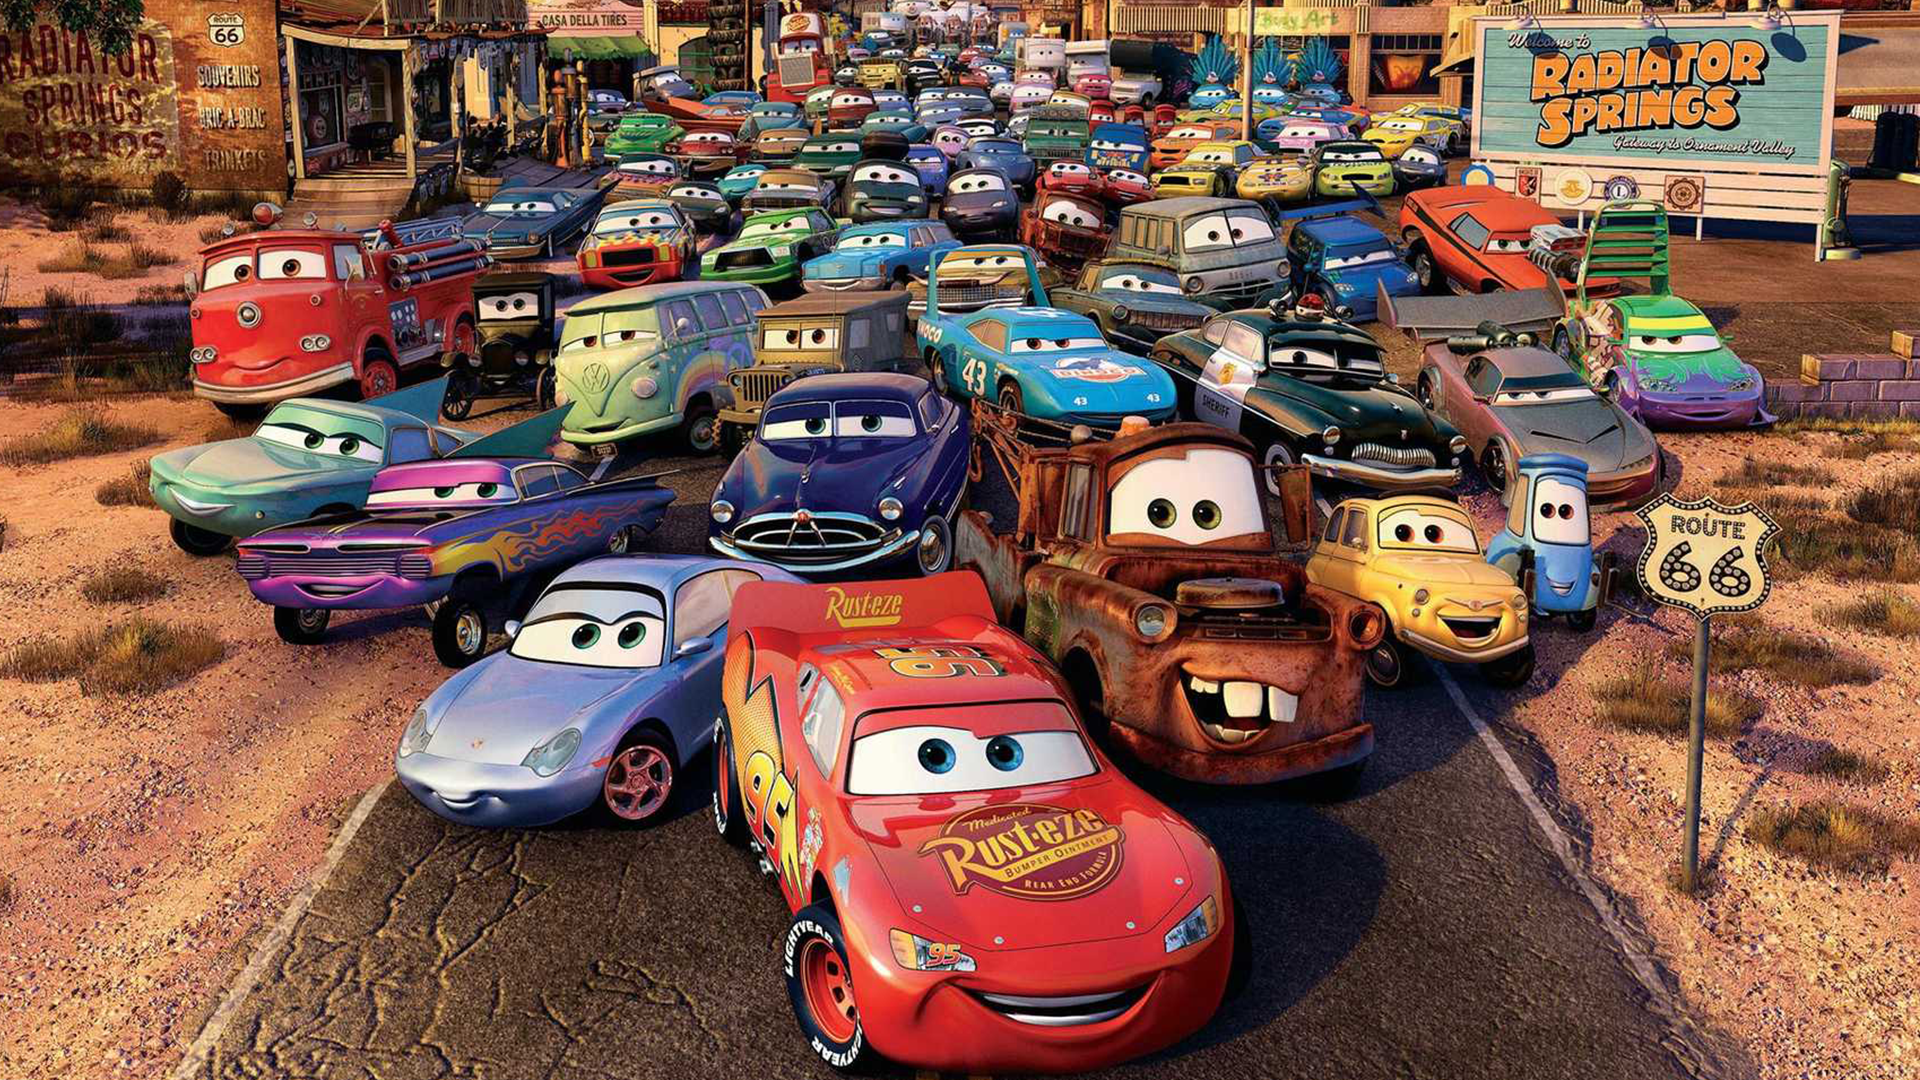 All the cars